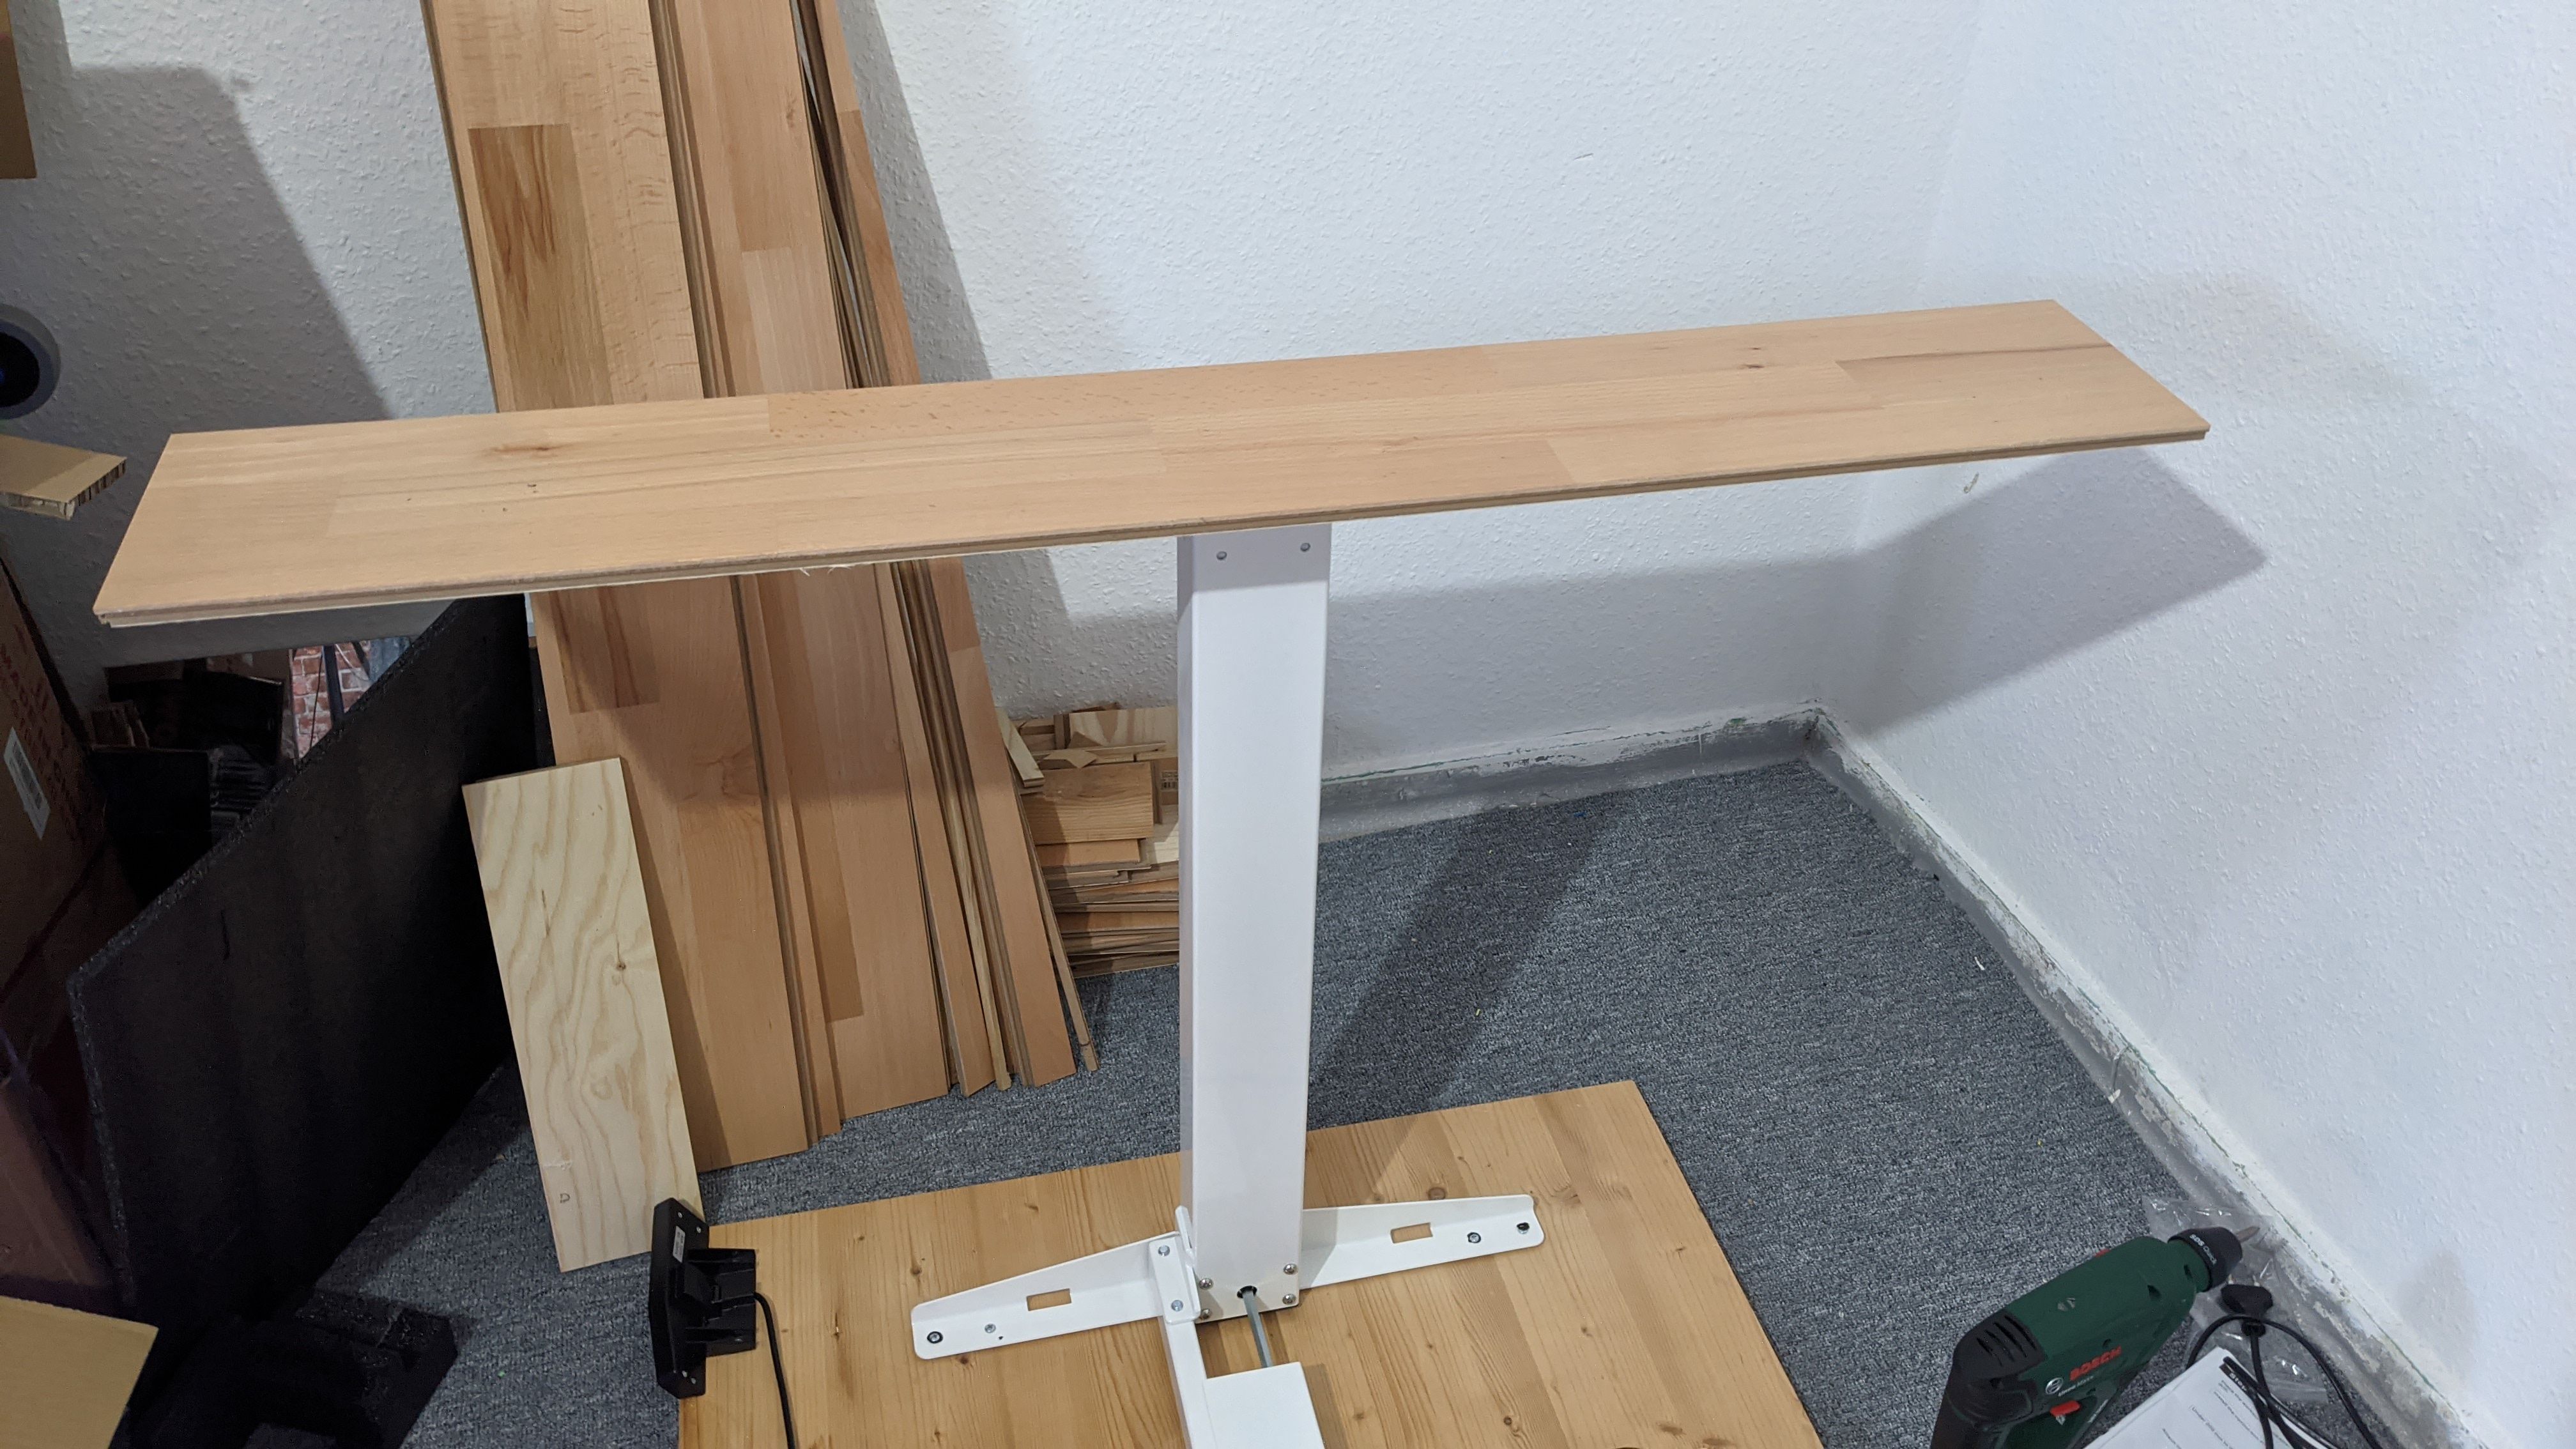 Using a piece of wood to pre-level the desk